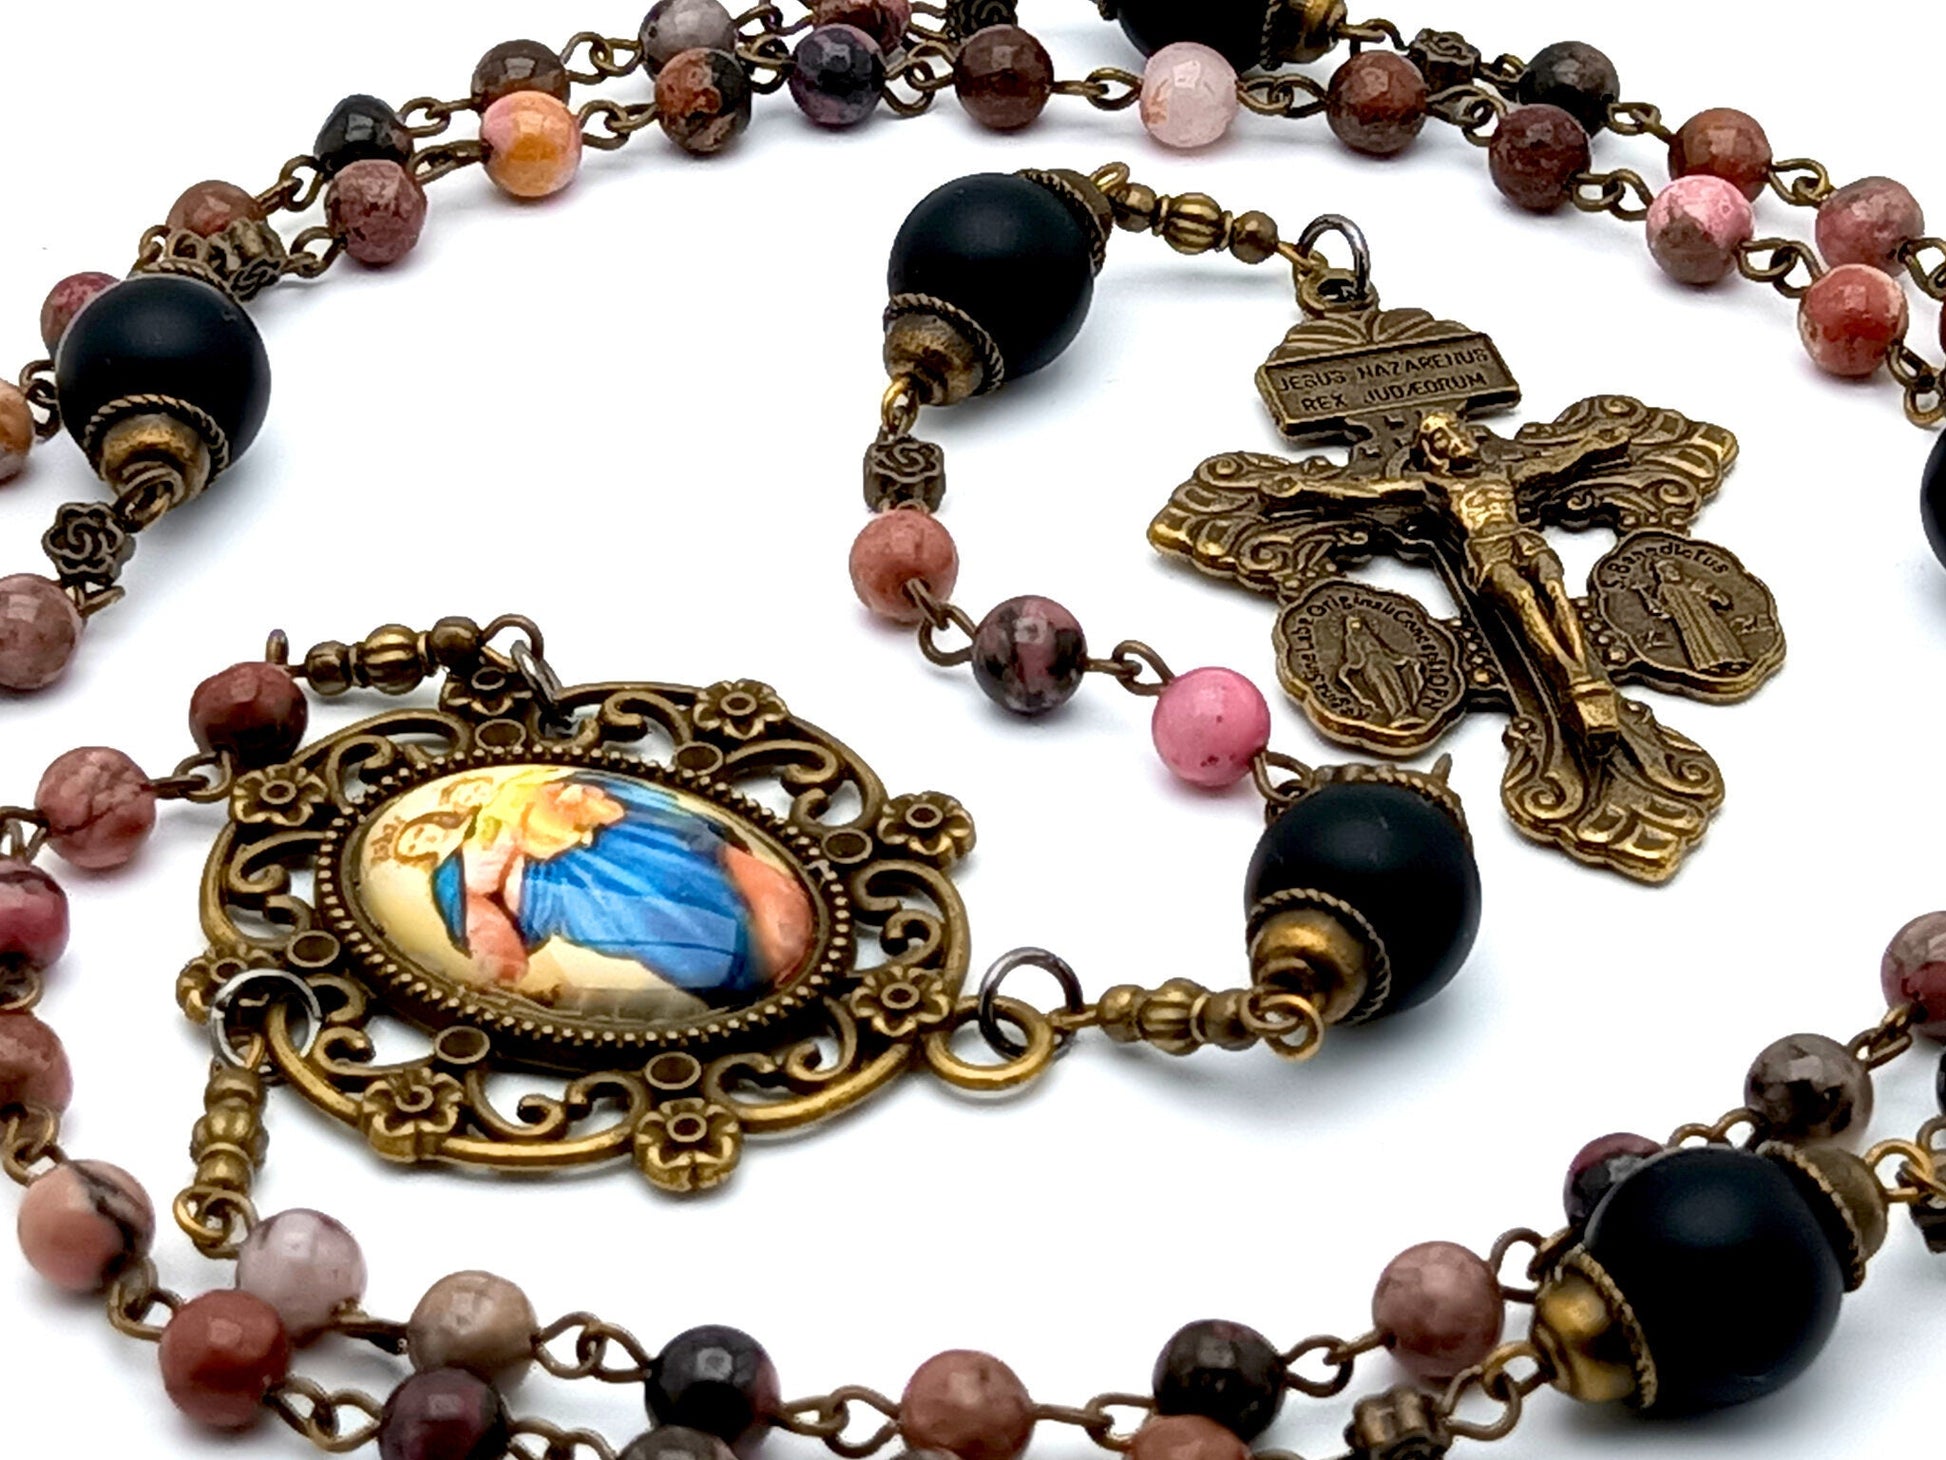 Our Lady help of Christians unique rosary beads with rhodonite and matt onyx gemstone beads, brass pardon crucifix and picture centre medal.